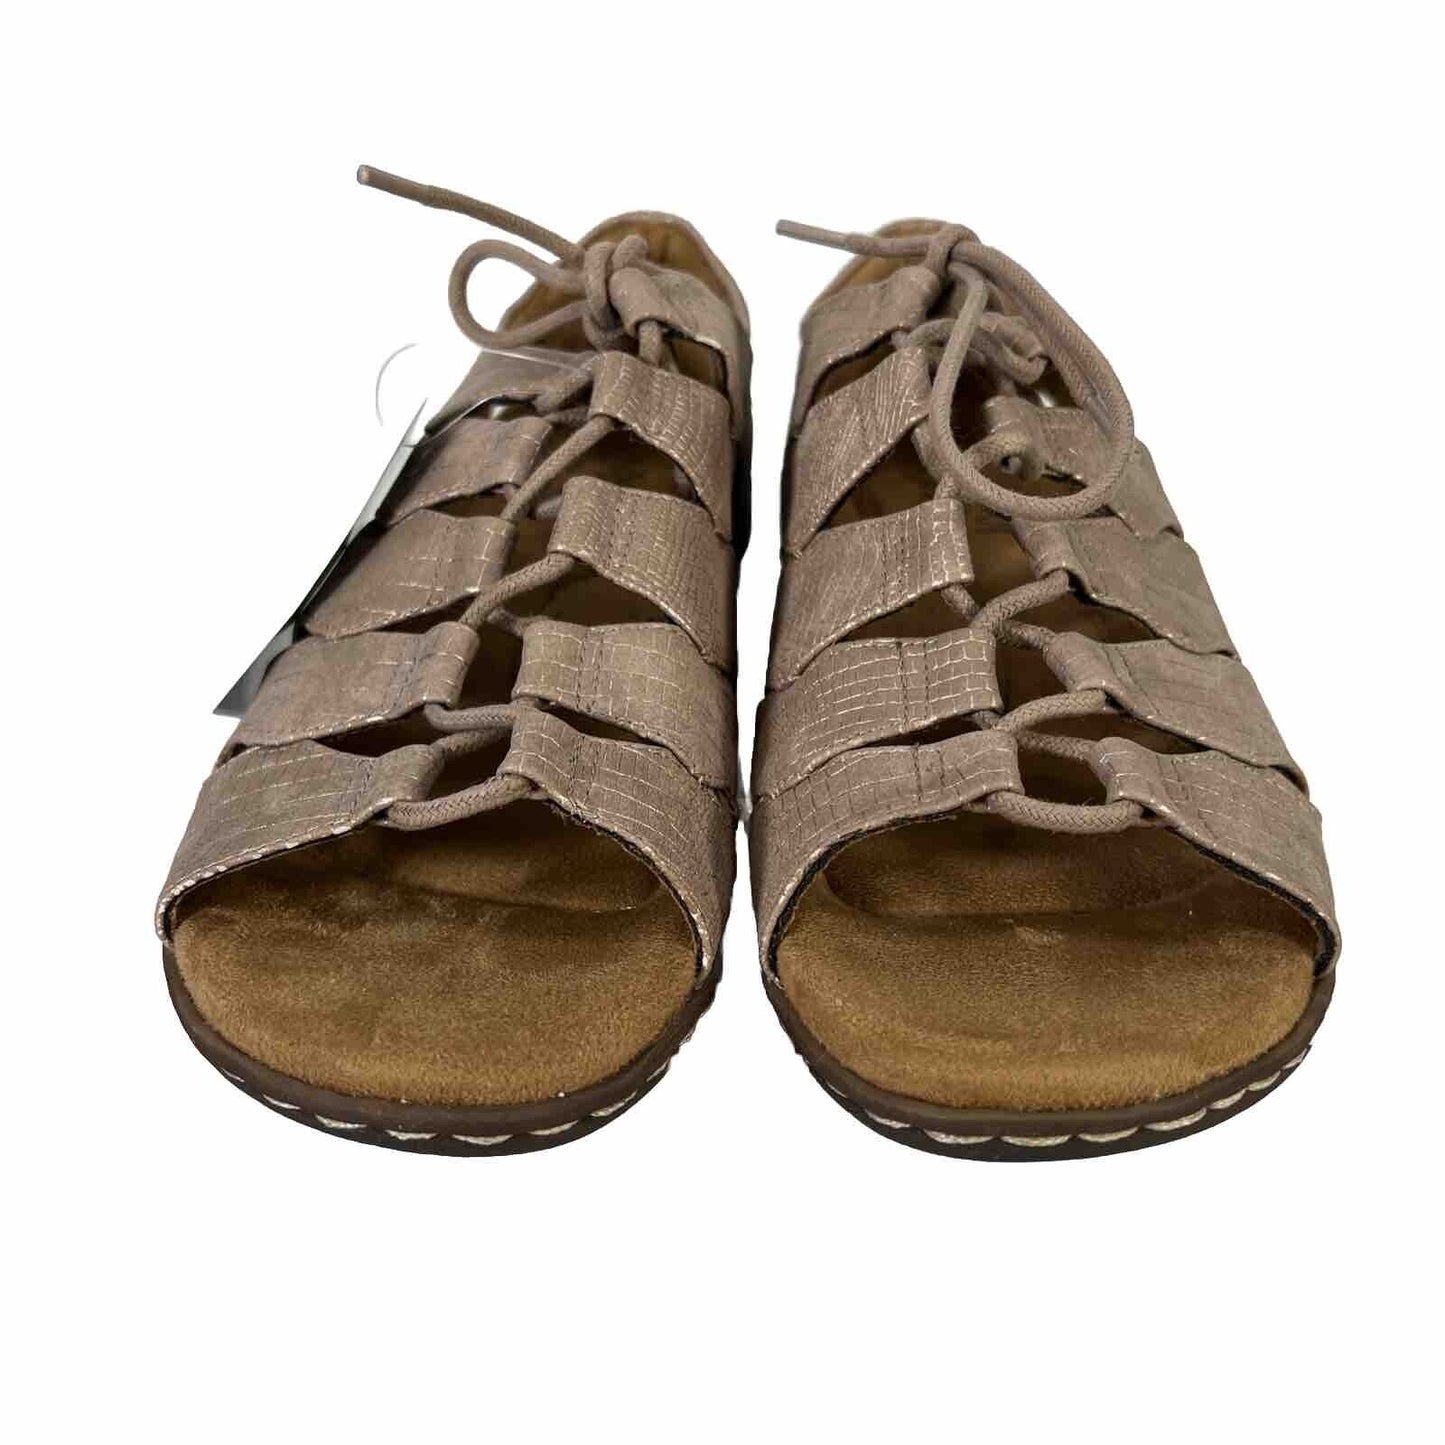 NEW Natural Soul Women's Tan/Rose Lace Up Low Gladiator Sandals - 9